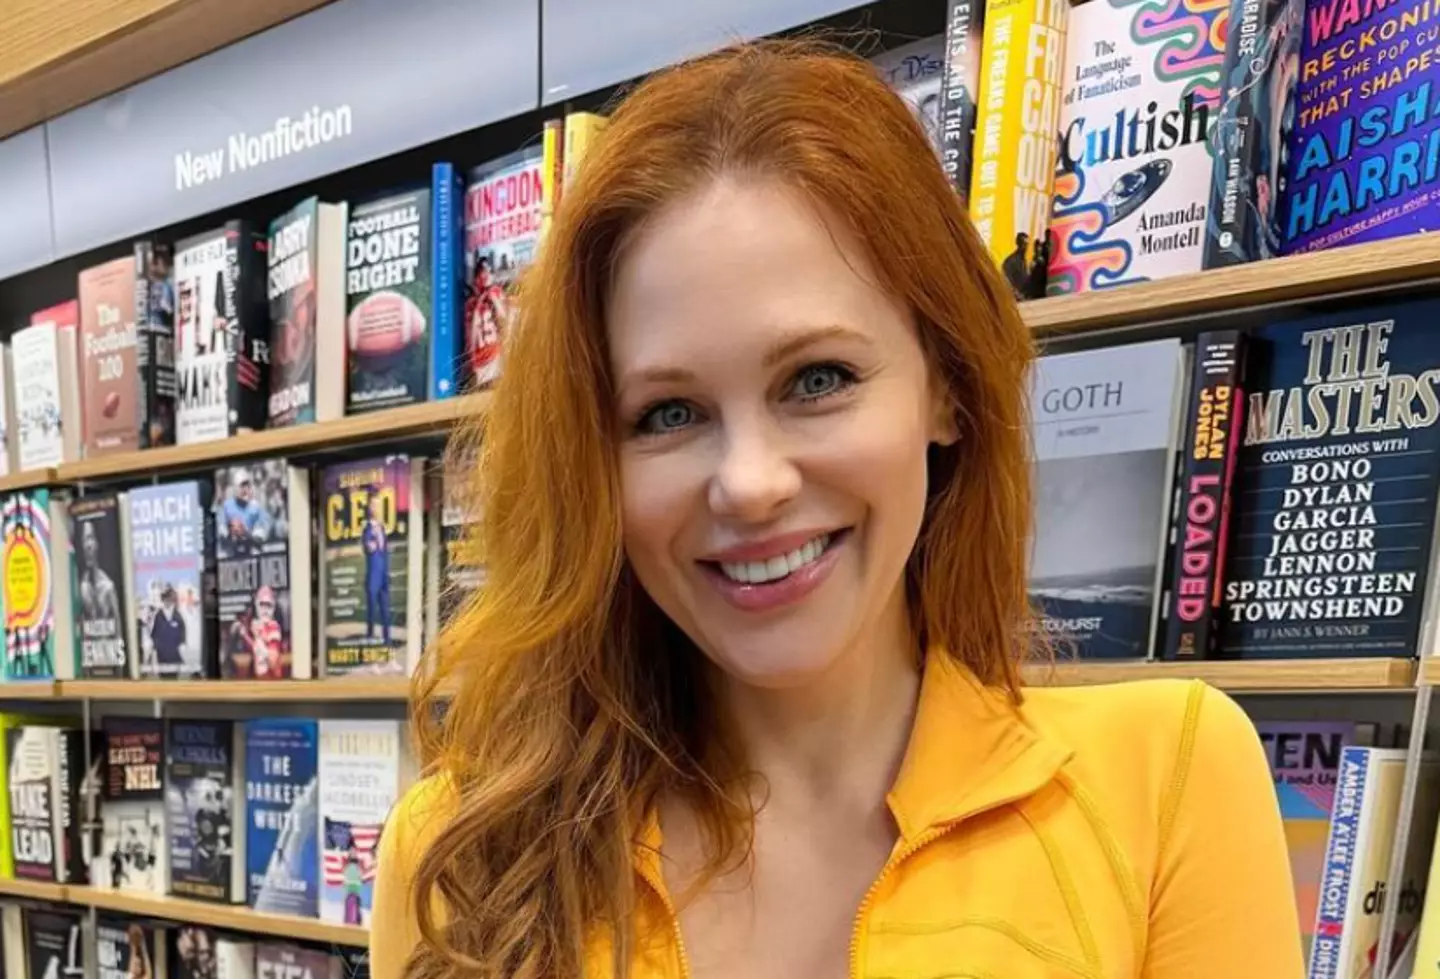 The porn star says that she enjoys her job and feels safe on set, contrary to how 'Pleasure' portrays it. (Instagram/@maitlandward)